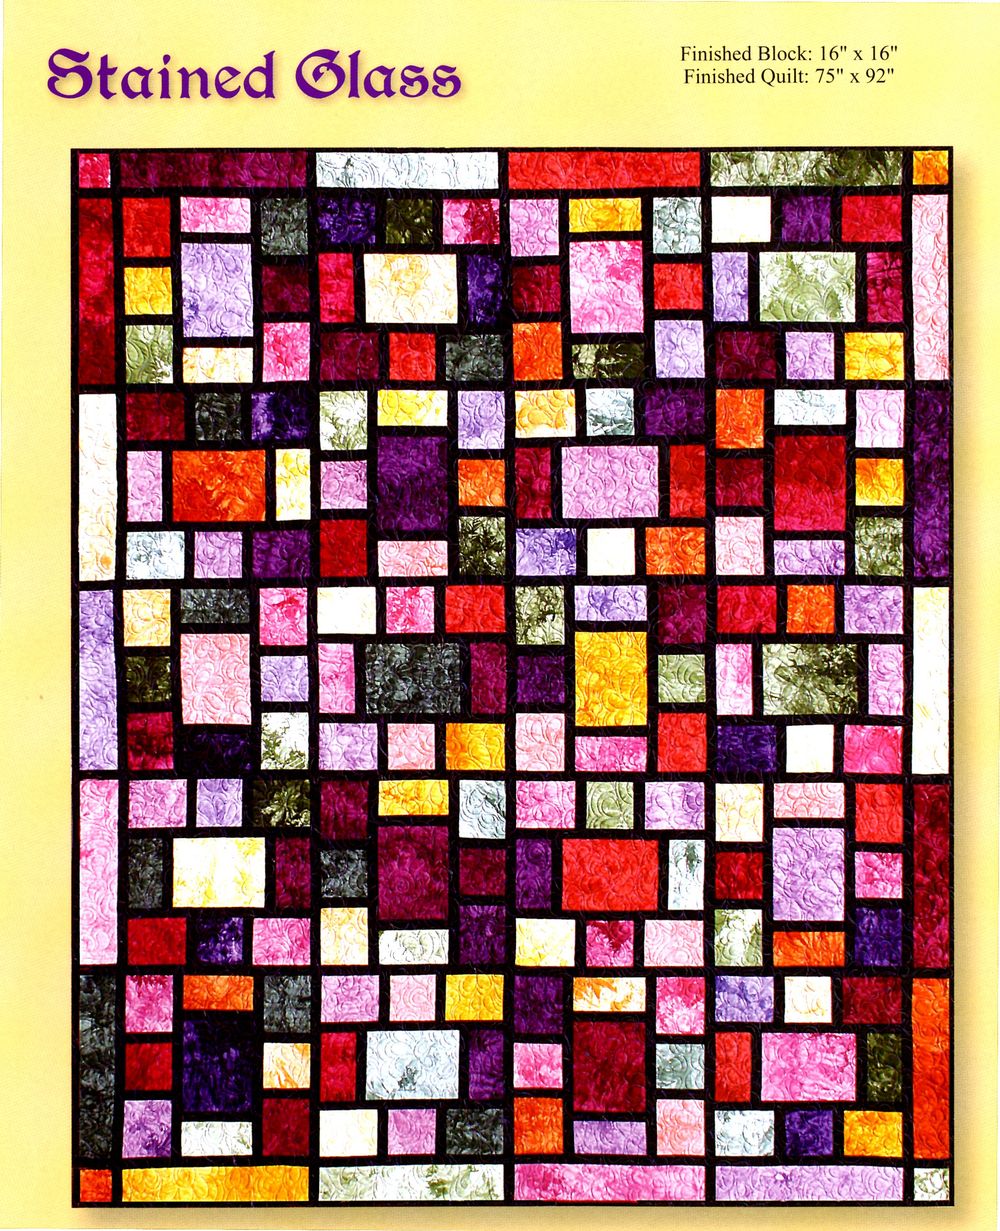 Turning Twenty Simply Sashed Quilt Pattern Book by Tricia Cribbs of Friendfolks